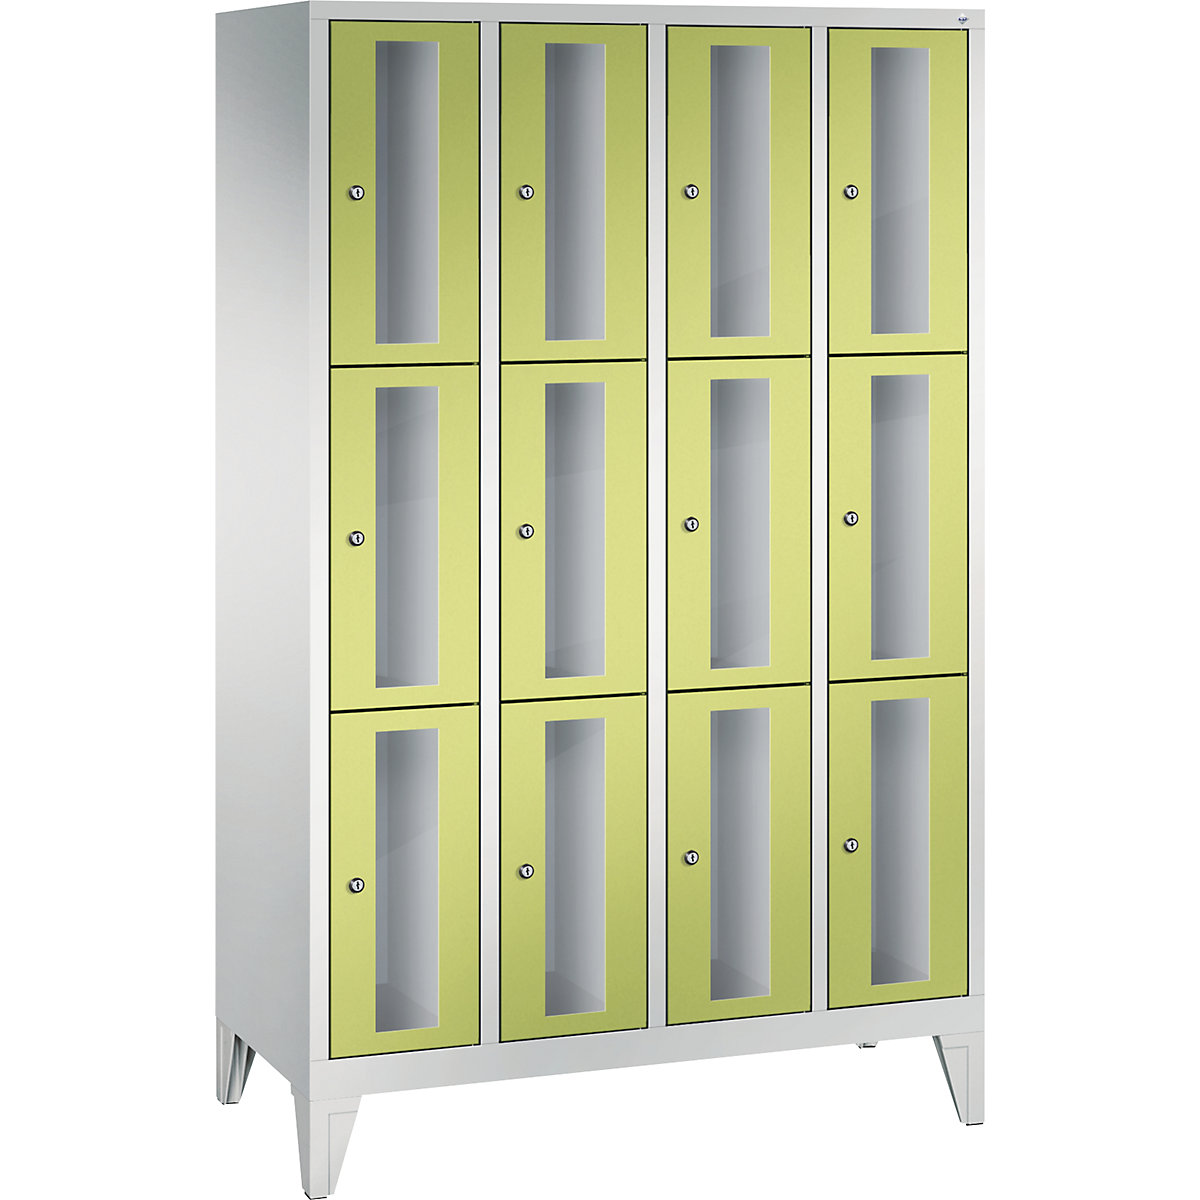 CLASSIC locker unit, compartment height 510 mm, with feet – C+P, 12 compartments, width 1190 mm, viridian green door-3